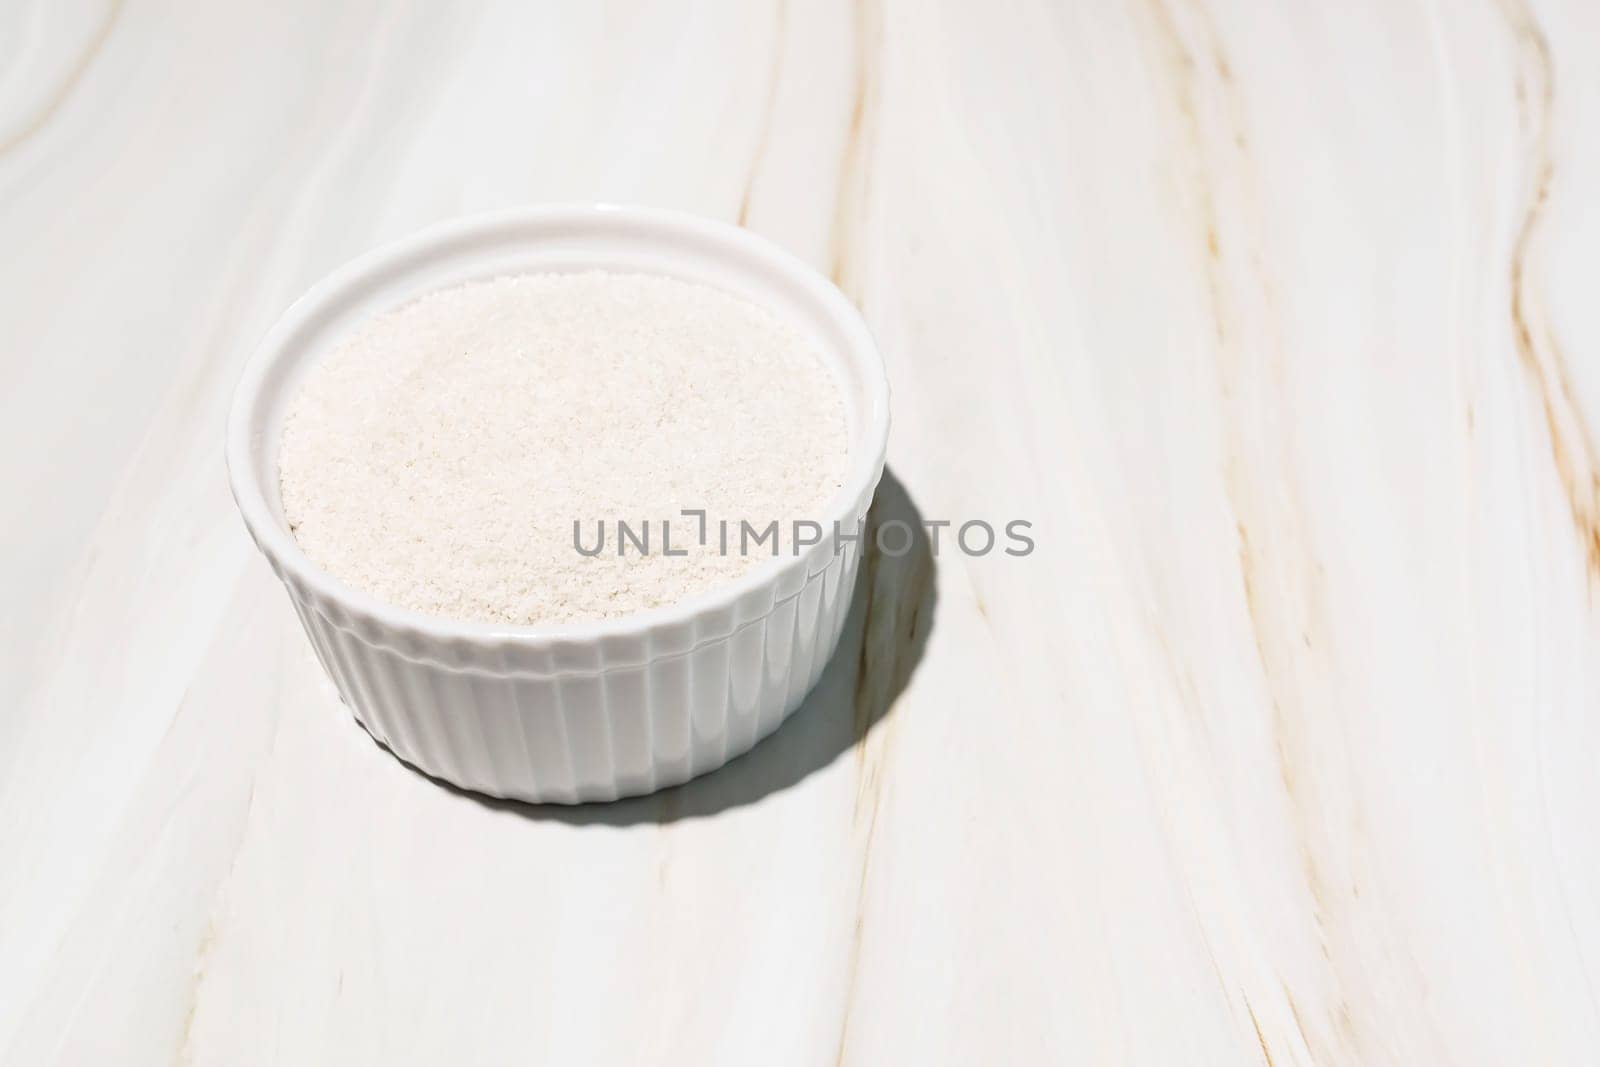 Celtic Gray Sea Salt In A White Ceramic Bowl On Granite Table, Copy Space. Horizontal Plane. Natural, Unrefined Salt Harvested From Brittany, France. Natural Minerals And Trace Elements, Superfood.